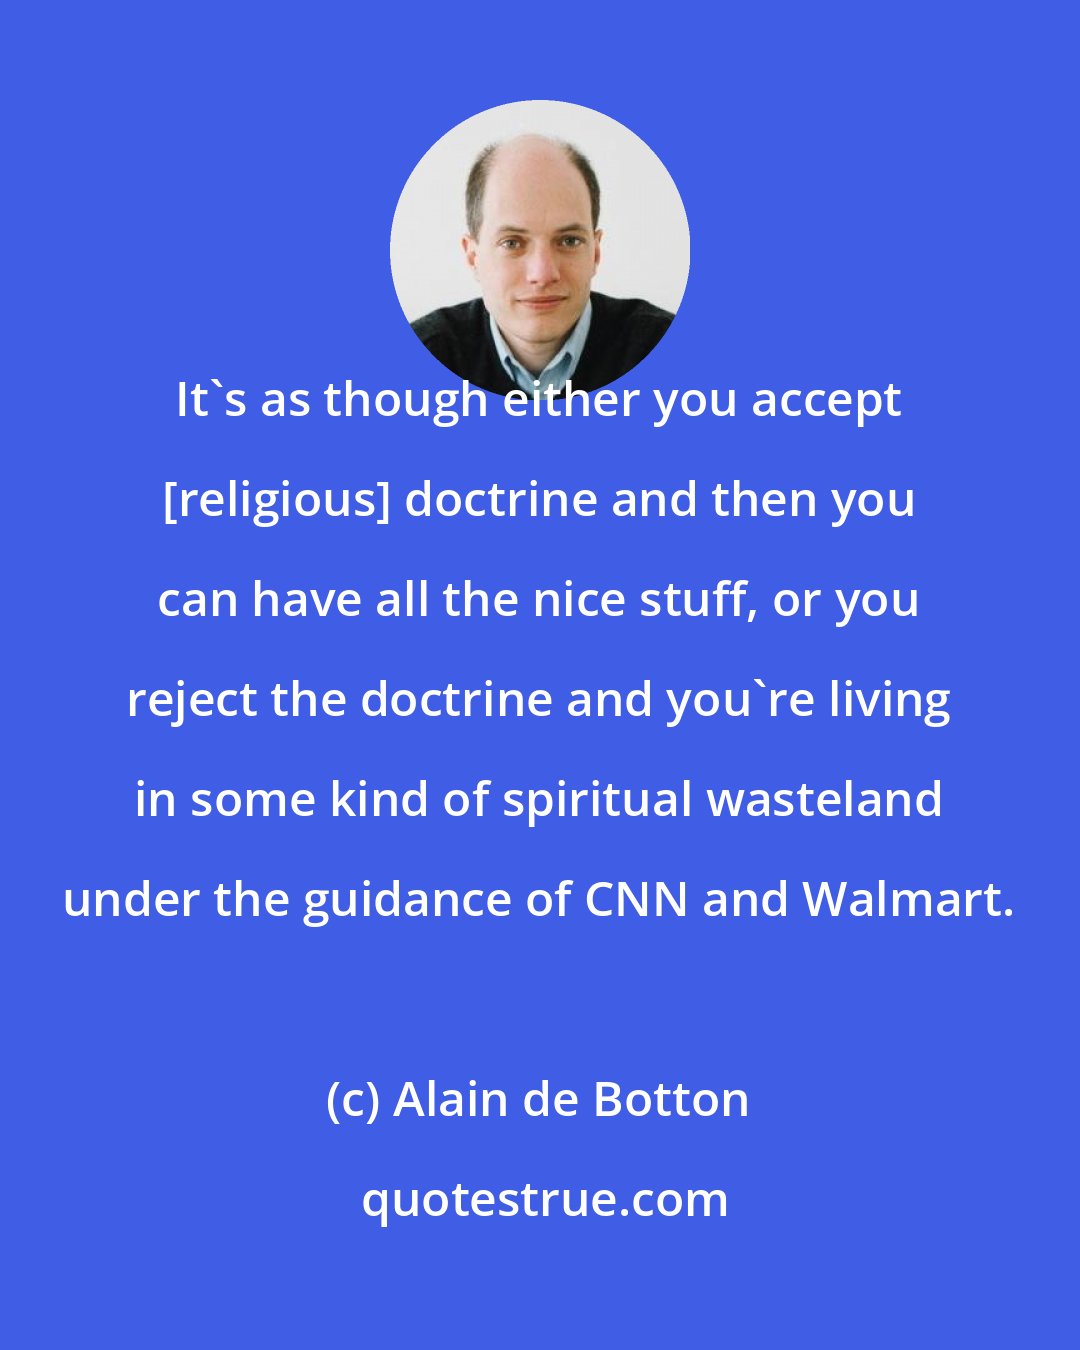 Alain de Botton: It's as though either you accept [religious] doctrine and then you can have all the nice stuff, or you reject the doctrine and you're living in some kind of spiritual wasteland under the guidance of CNN and Walmart.